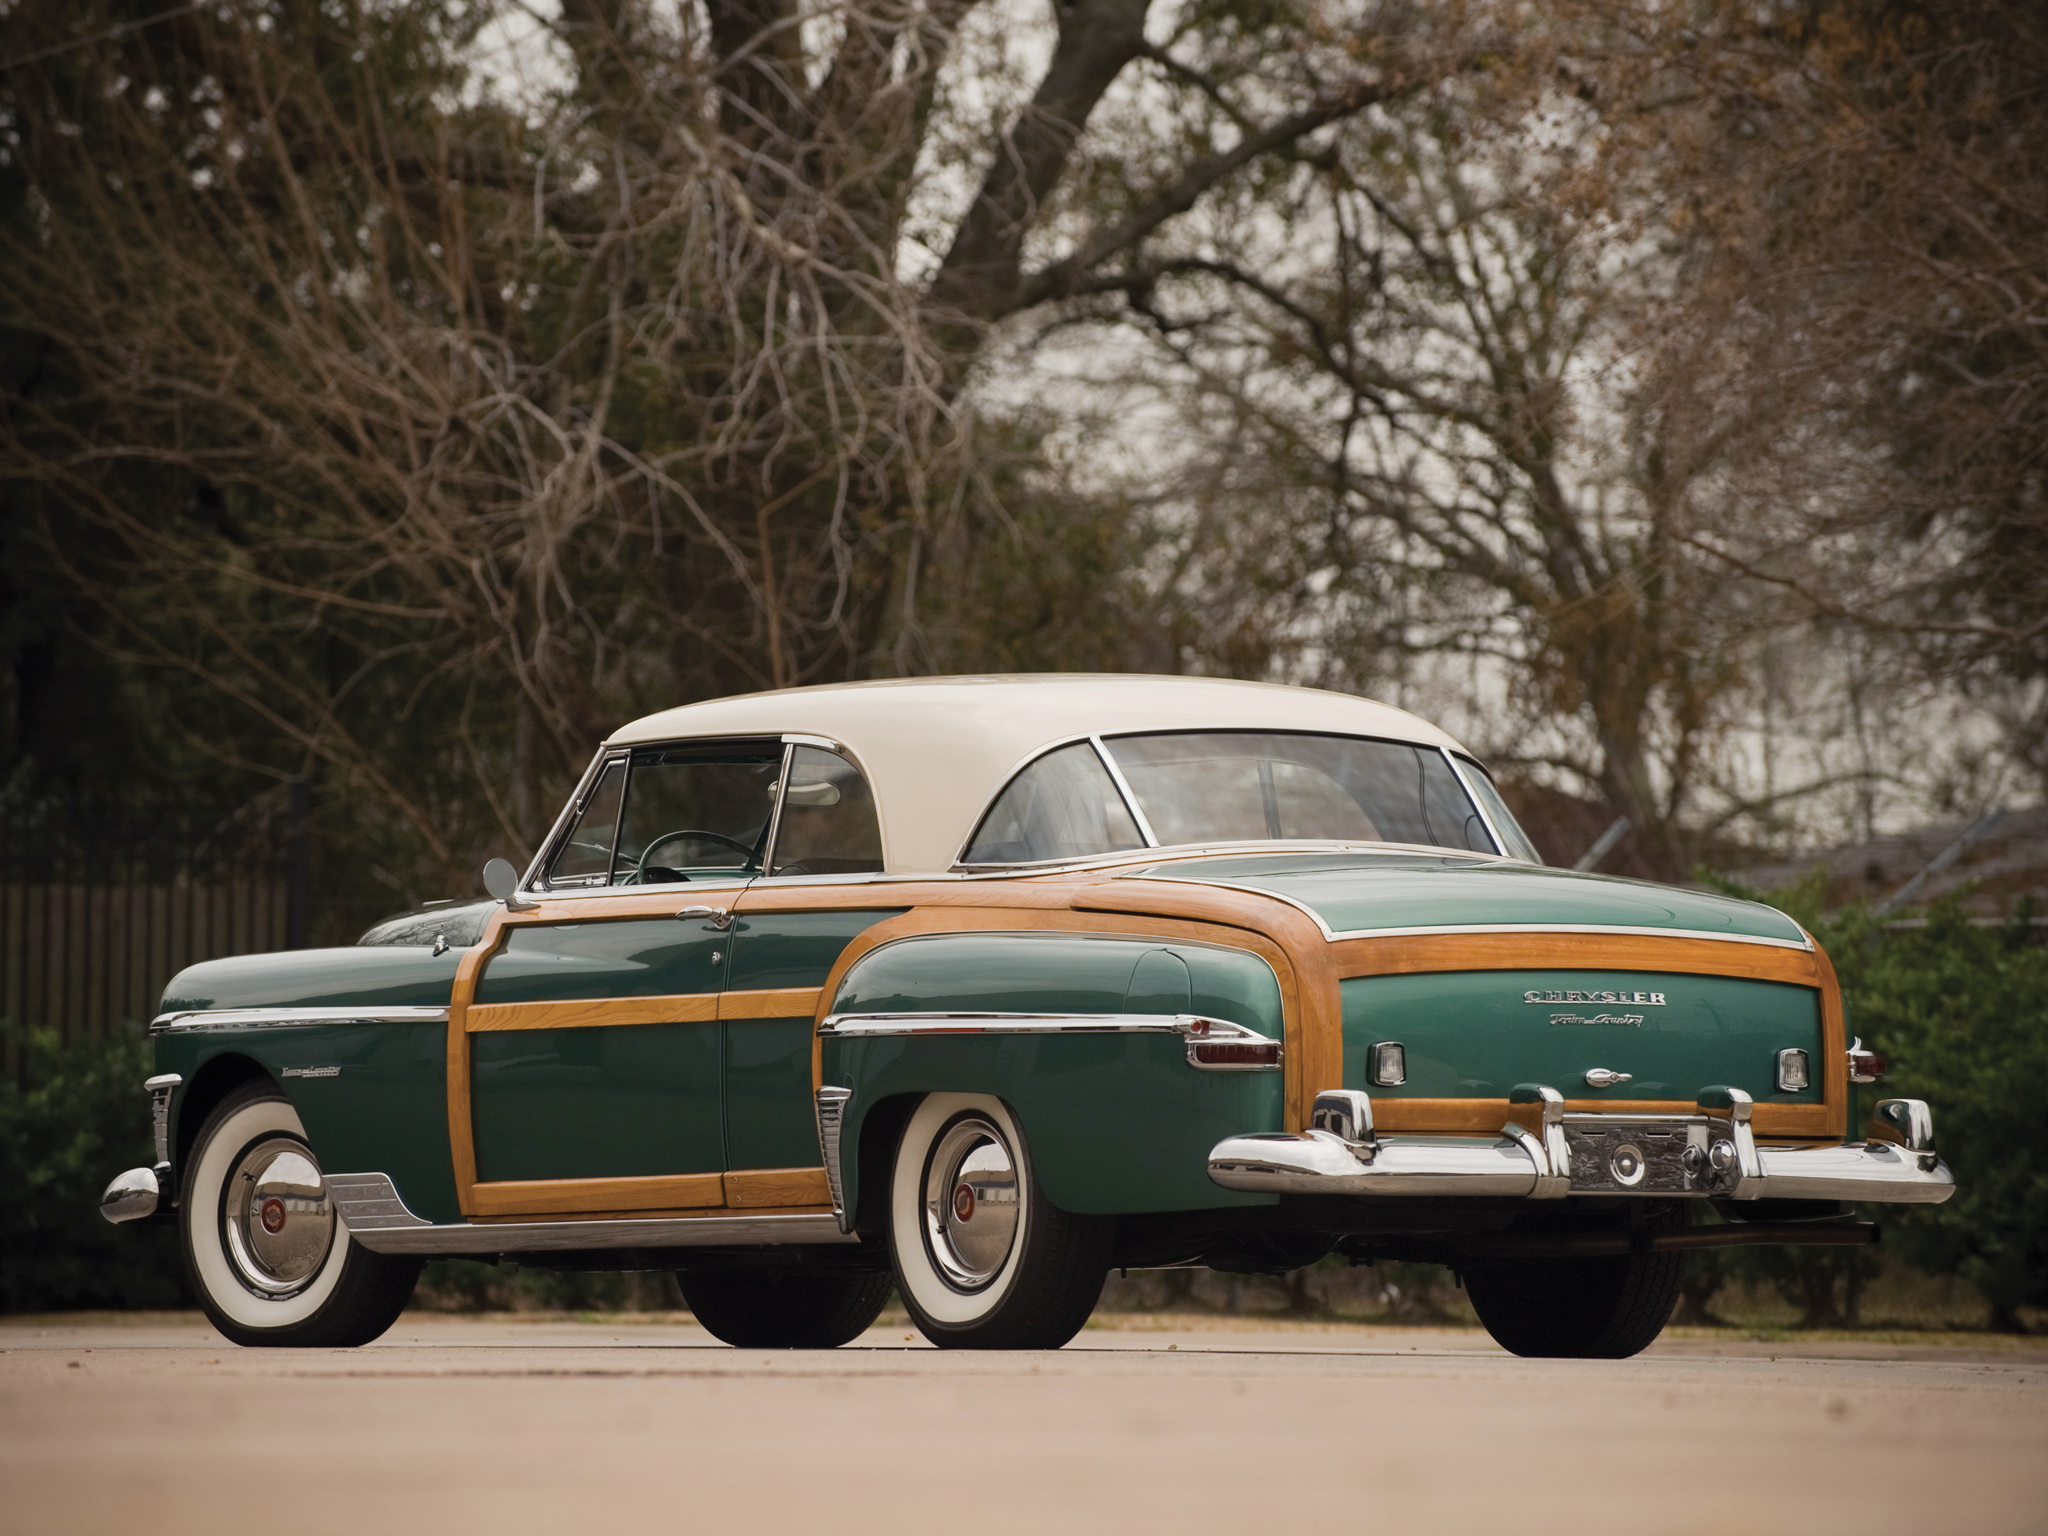 1950, Chrysler, New, Yorker, Town, Country, Newport, Coupe, C49n, Retro Wallpaper